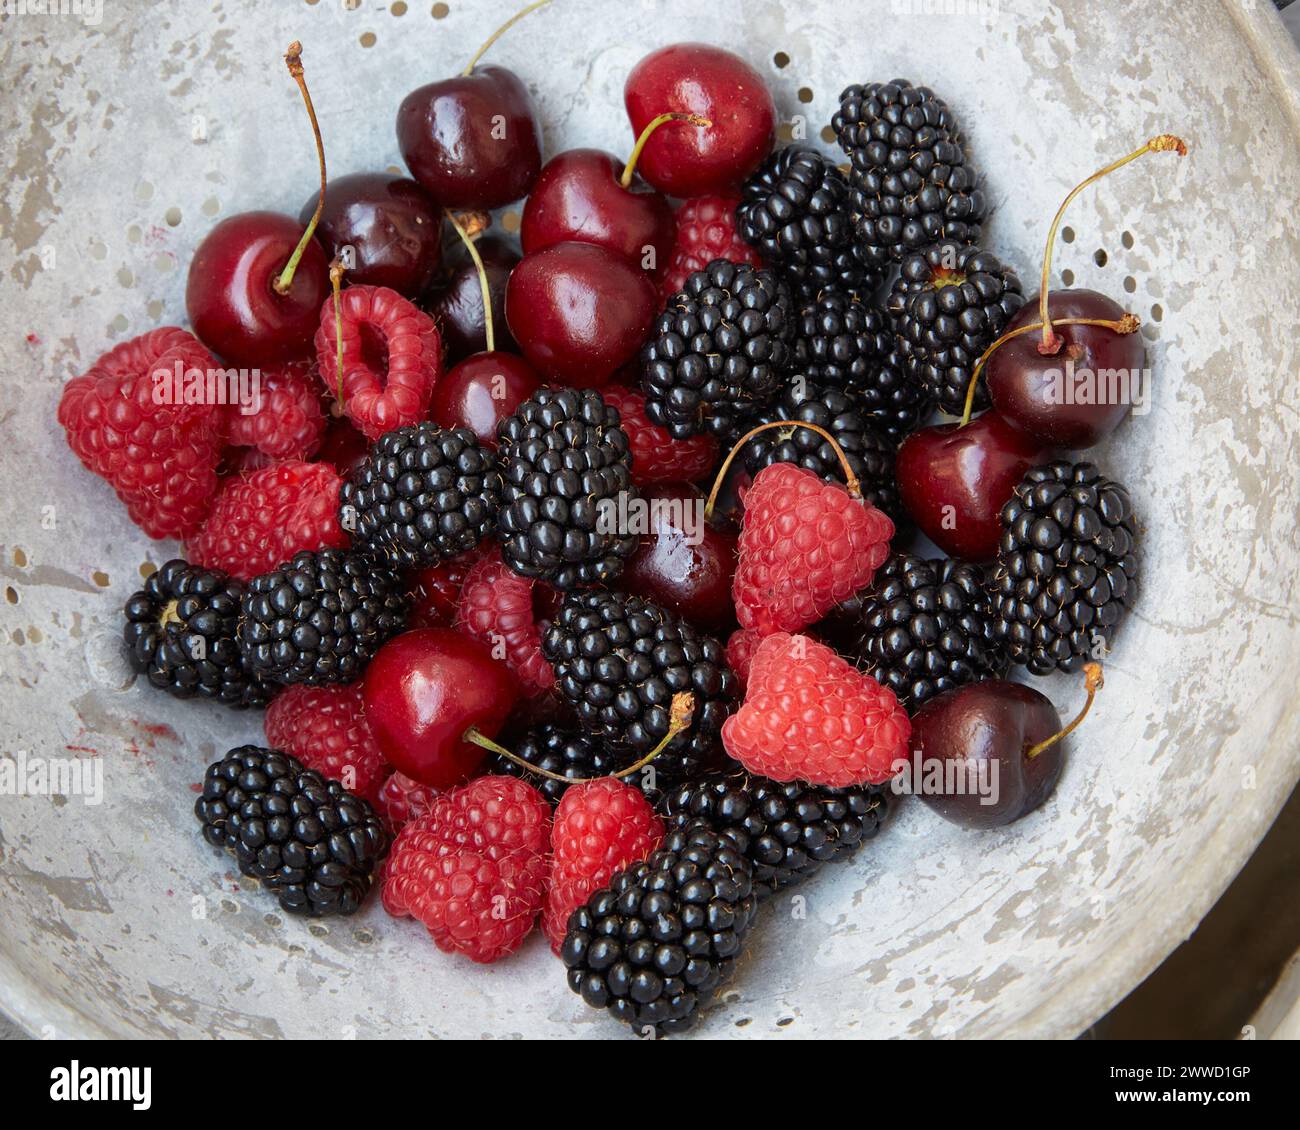 Group of Mixed Berries in an Aluminum Strainer Stock Photo